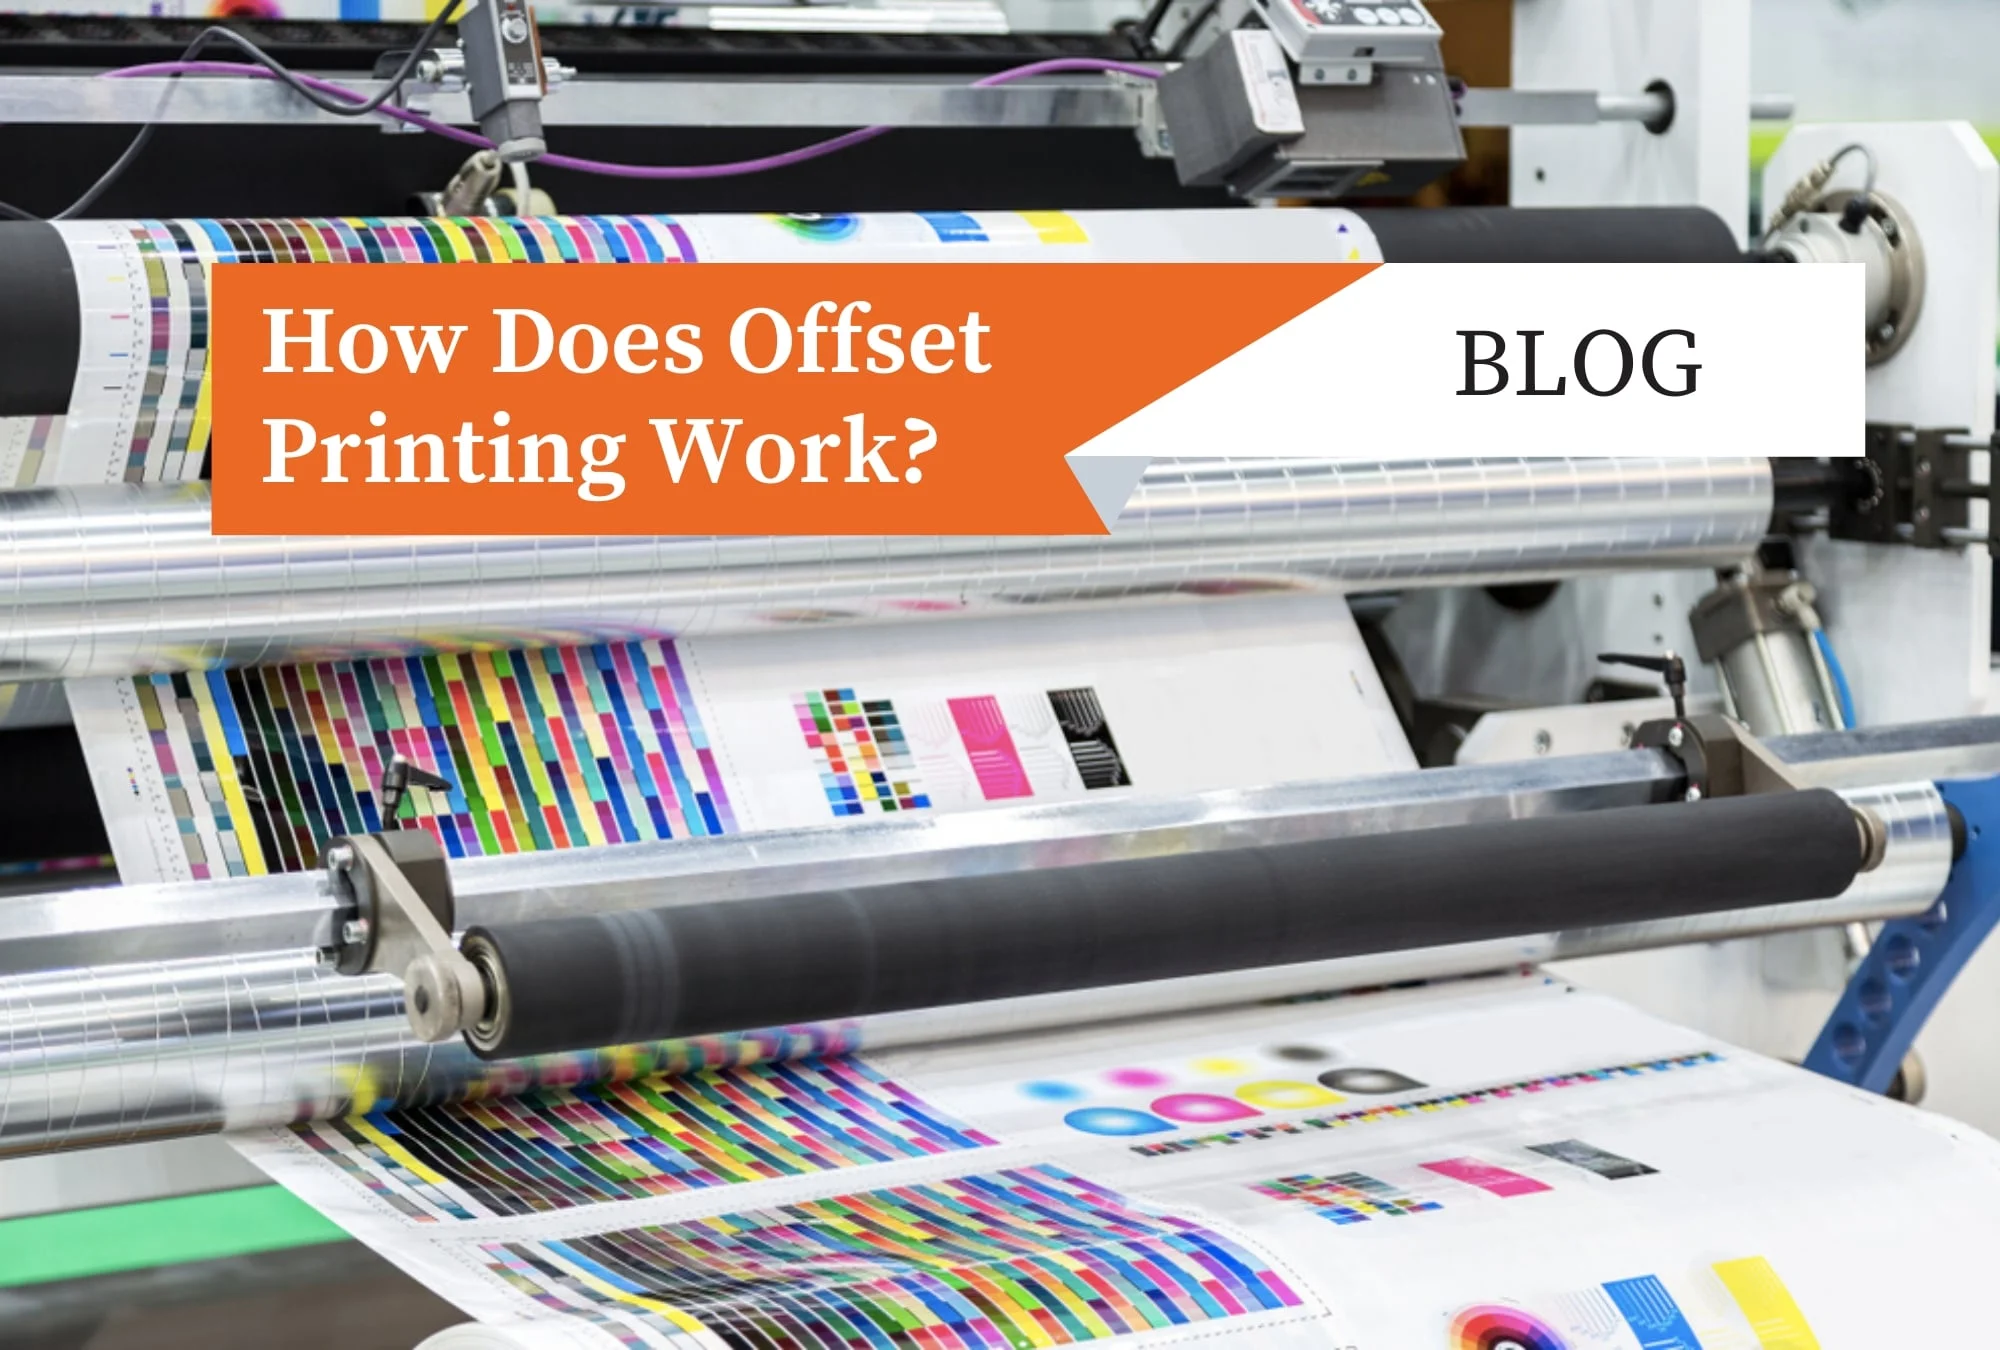 how-does-offset-printing-work-banner